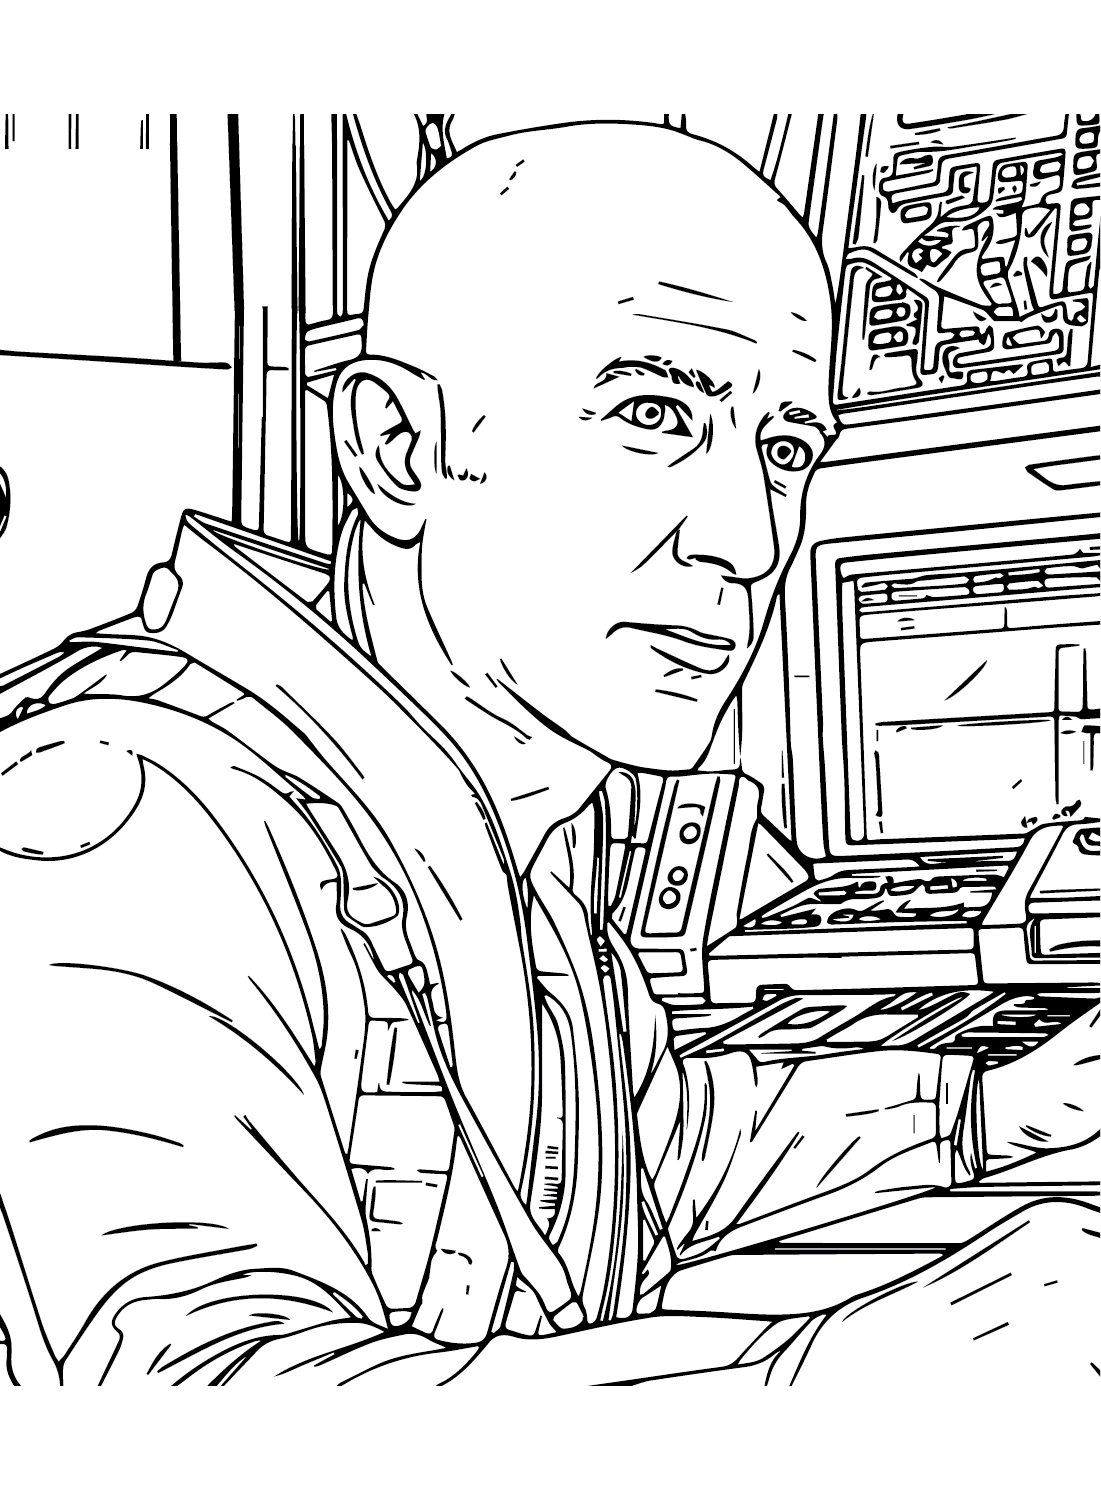 Jeff Bezos Coloring Pages Online For Kids